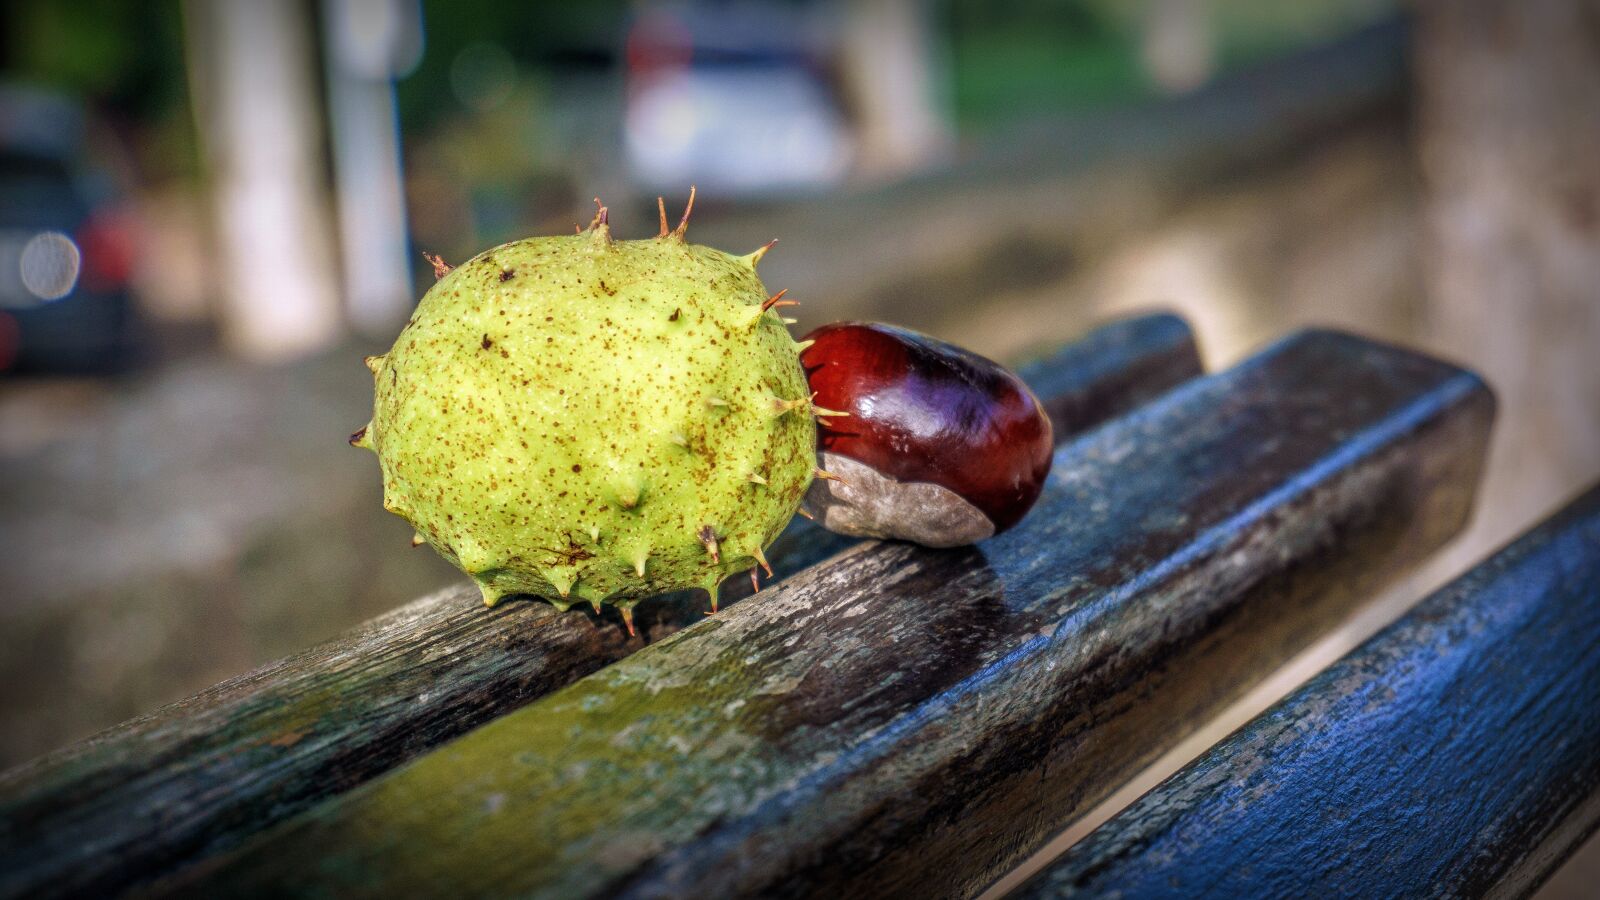 Sony a6000 sample photo. Chestnuts, fruits, thorny photography